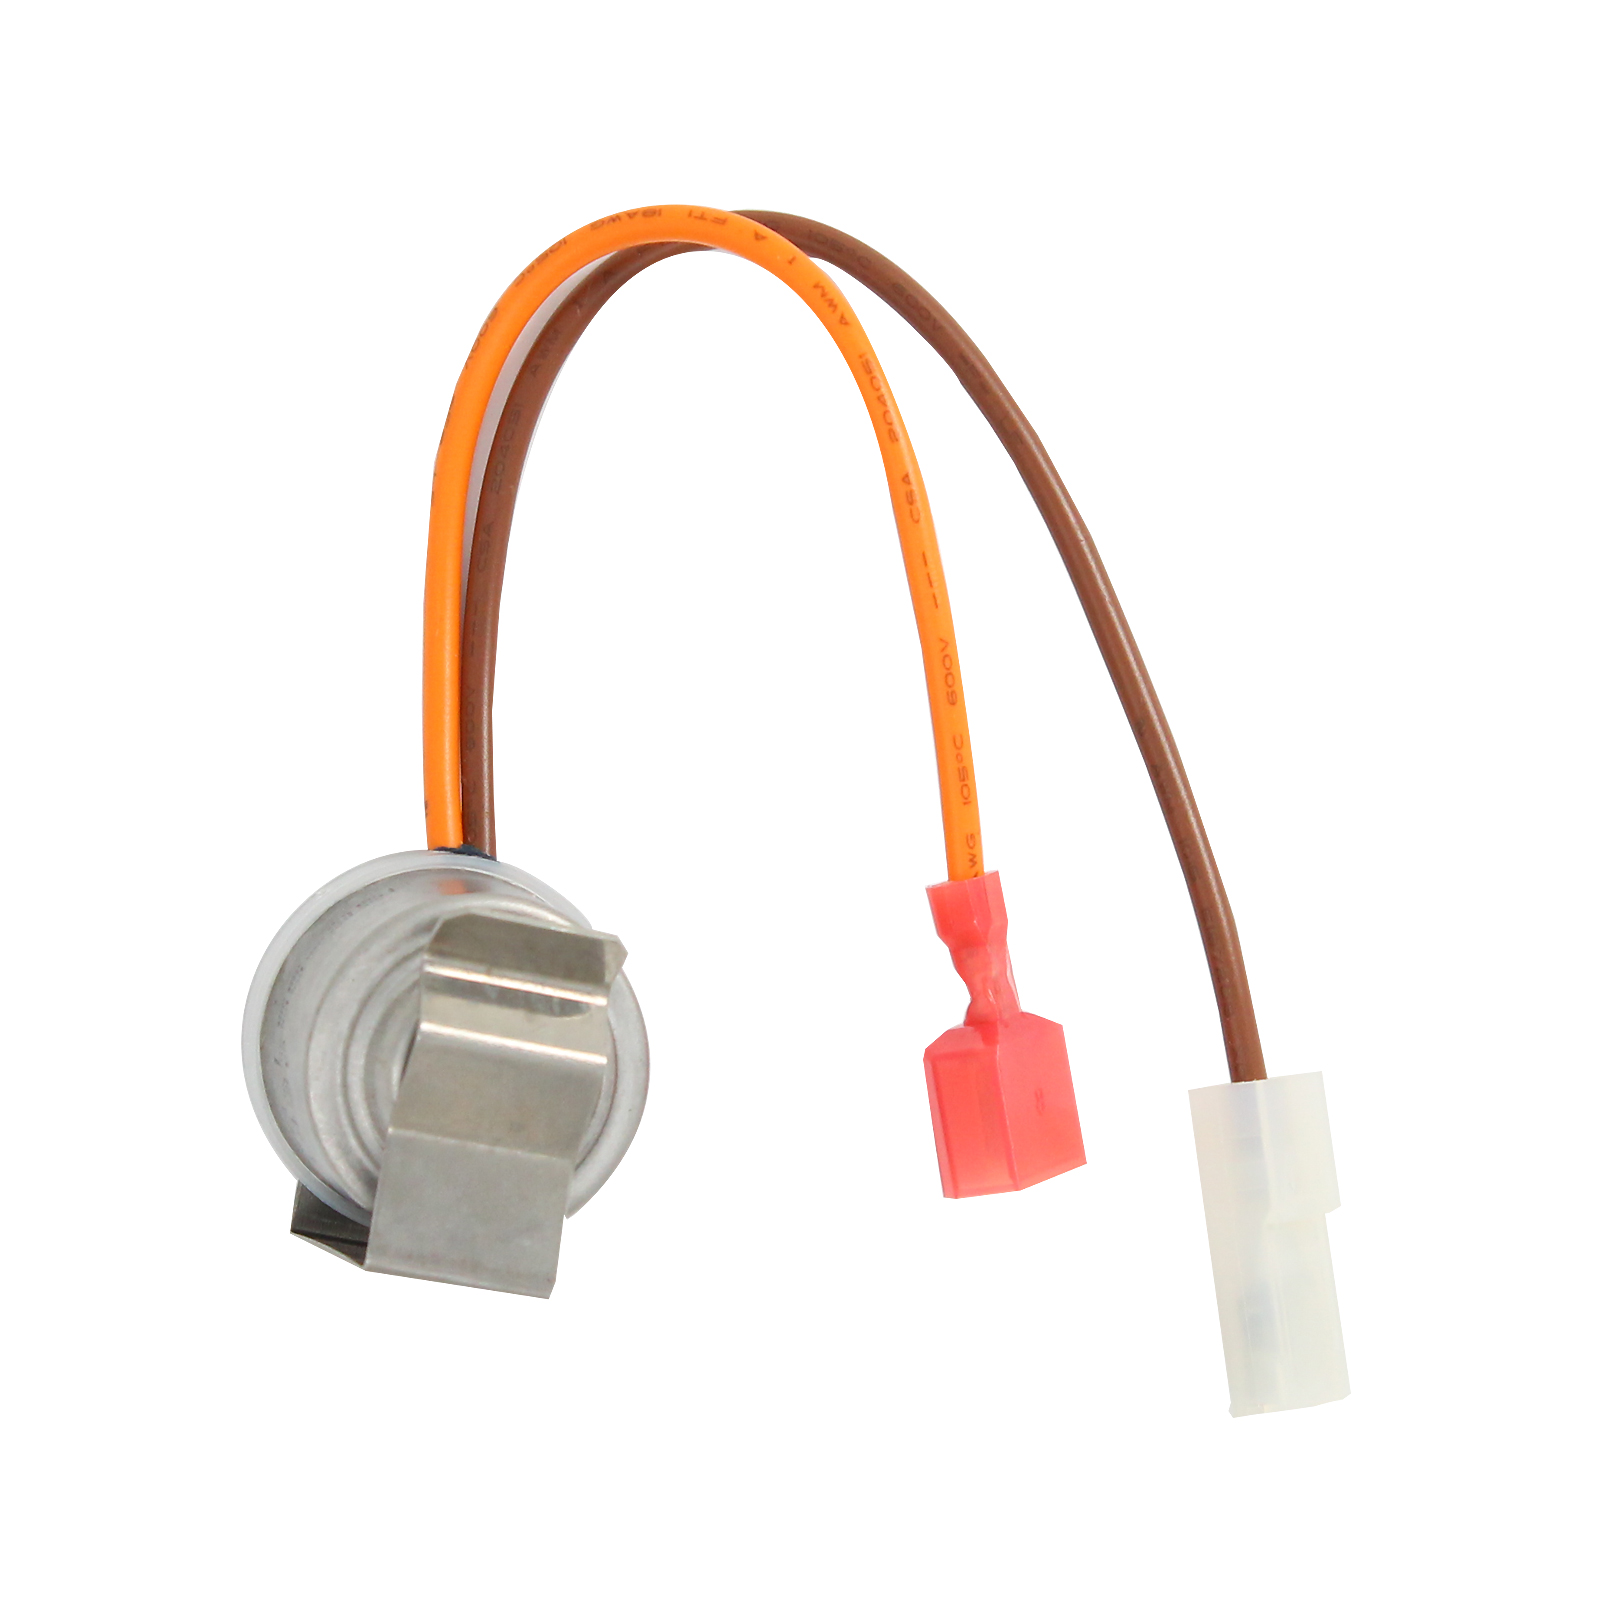 WP10442411 Refrigerator Defrost Thermostat Replacement for Amana BX21V1W (P1325028W W) Refrigerator - Compatible with 10442411 Defrost Thermostat - image 3 of 4